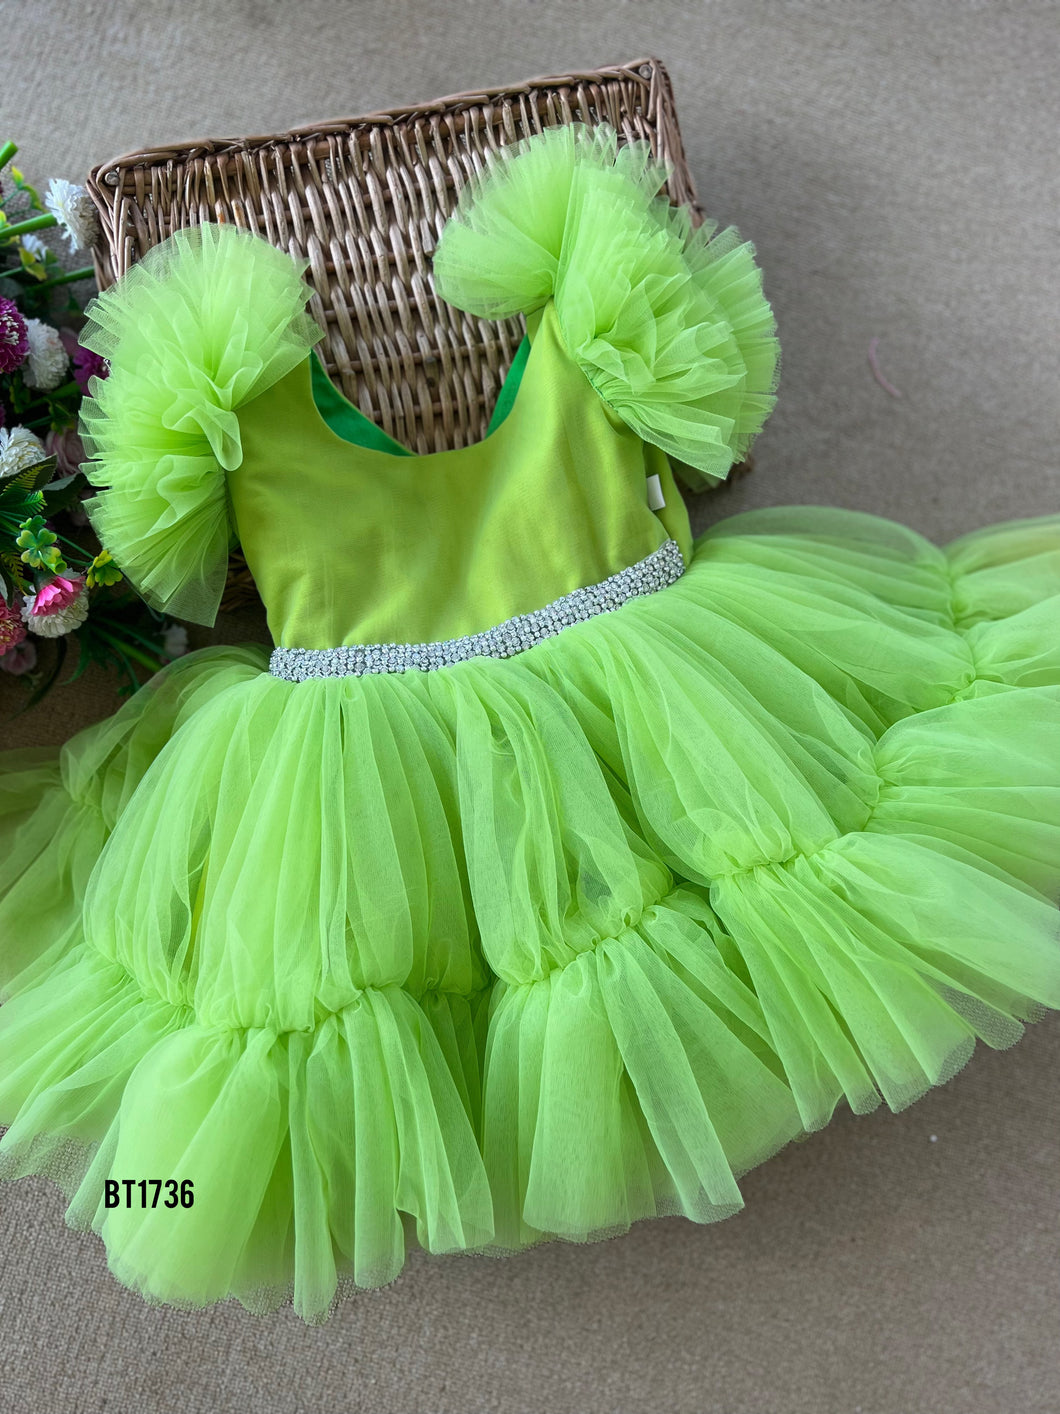 BT1736 Lime Light Party Dress - Sparkle and Frill for Your Little Star